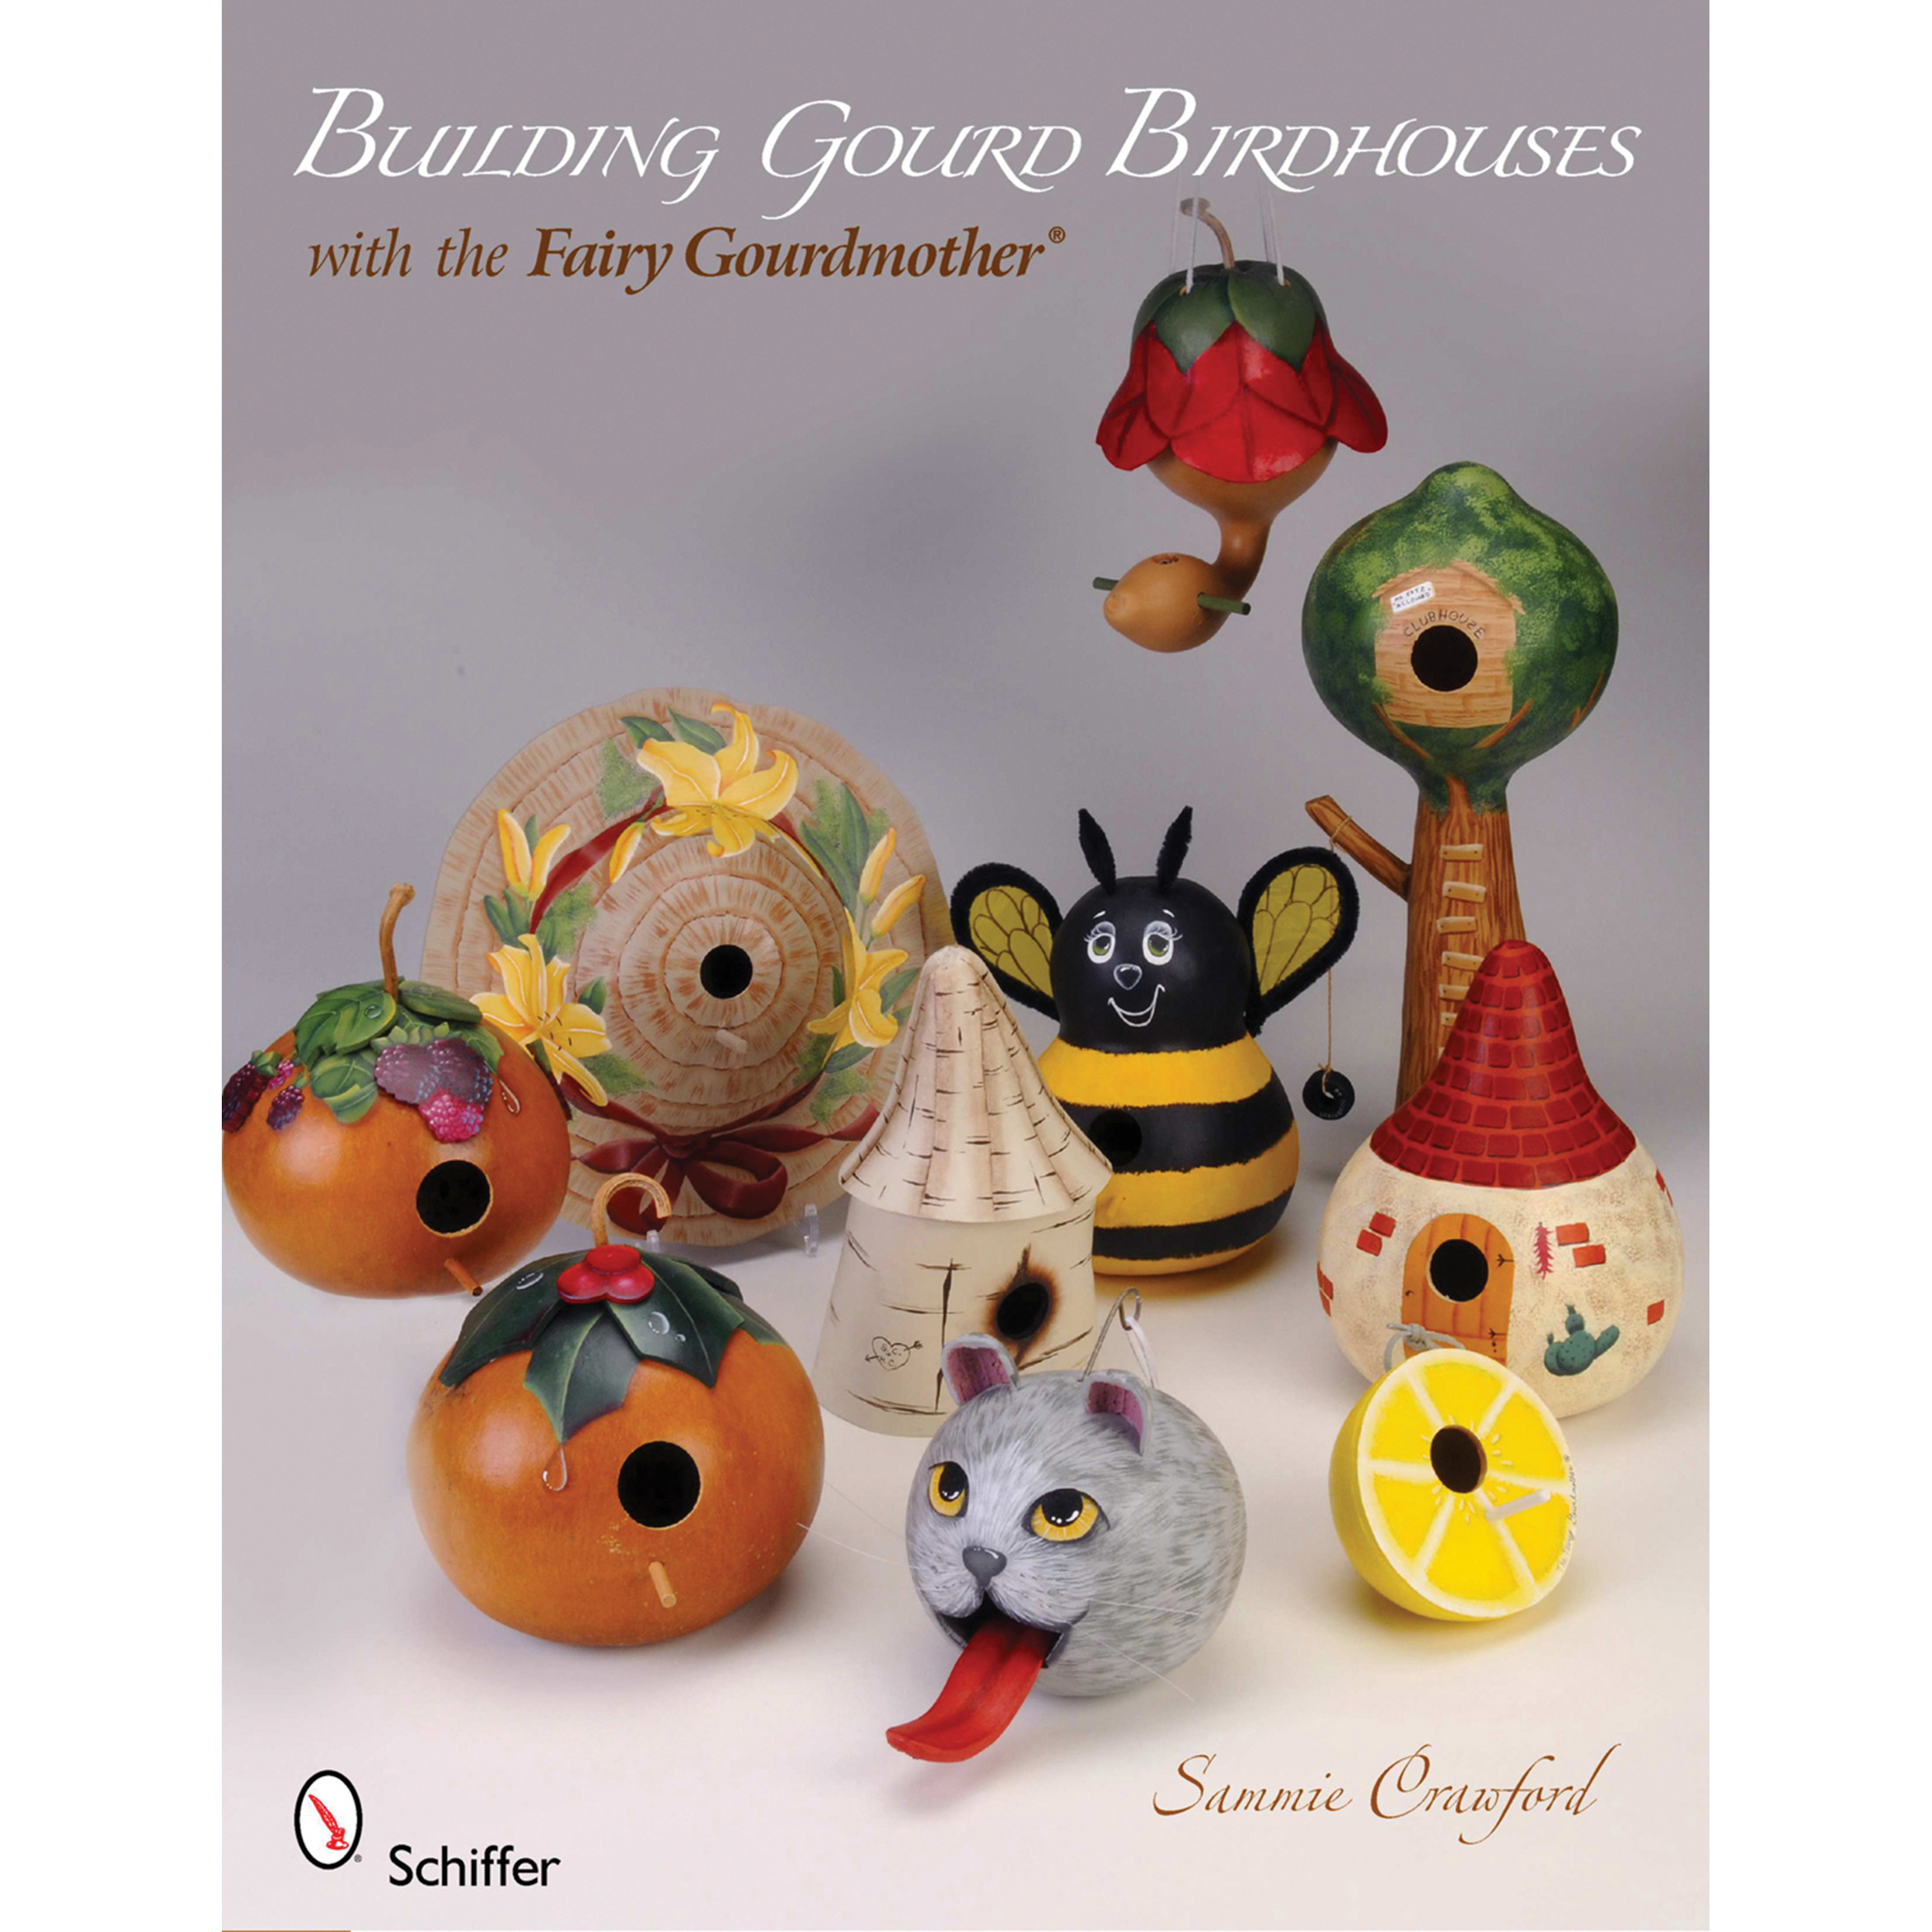 Building Gourd Birdhouses With The Fairy Gourdmother